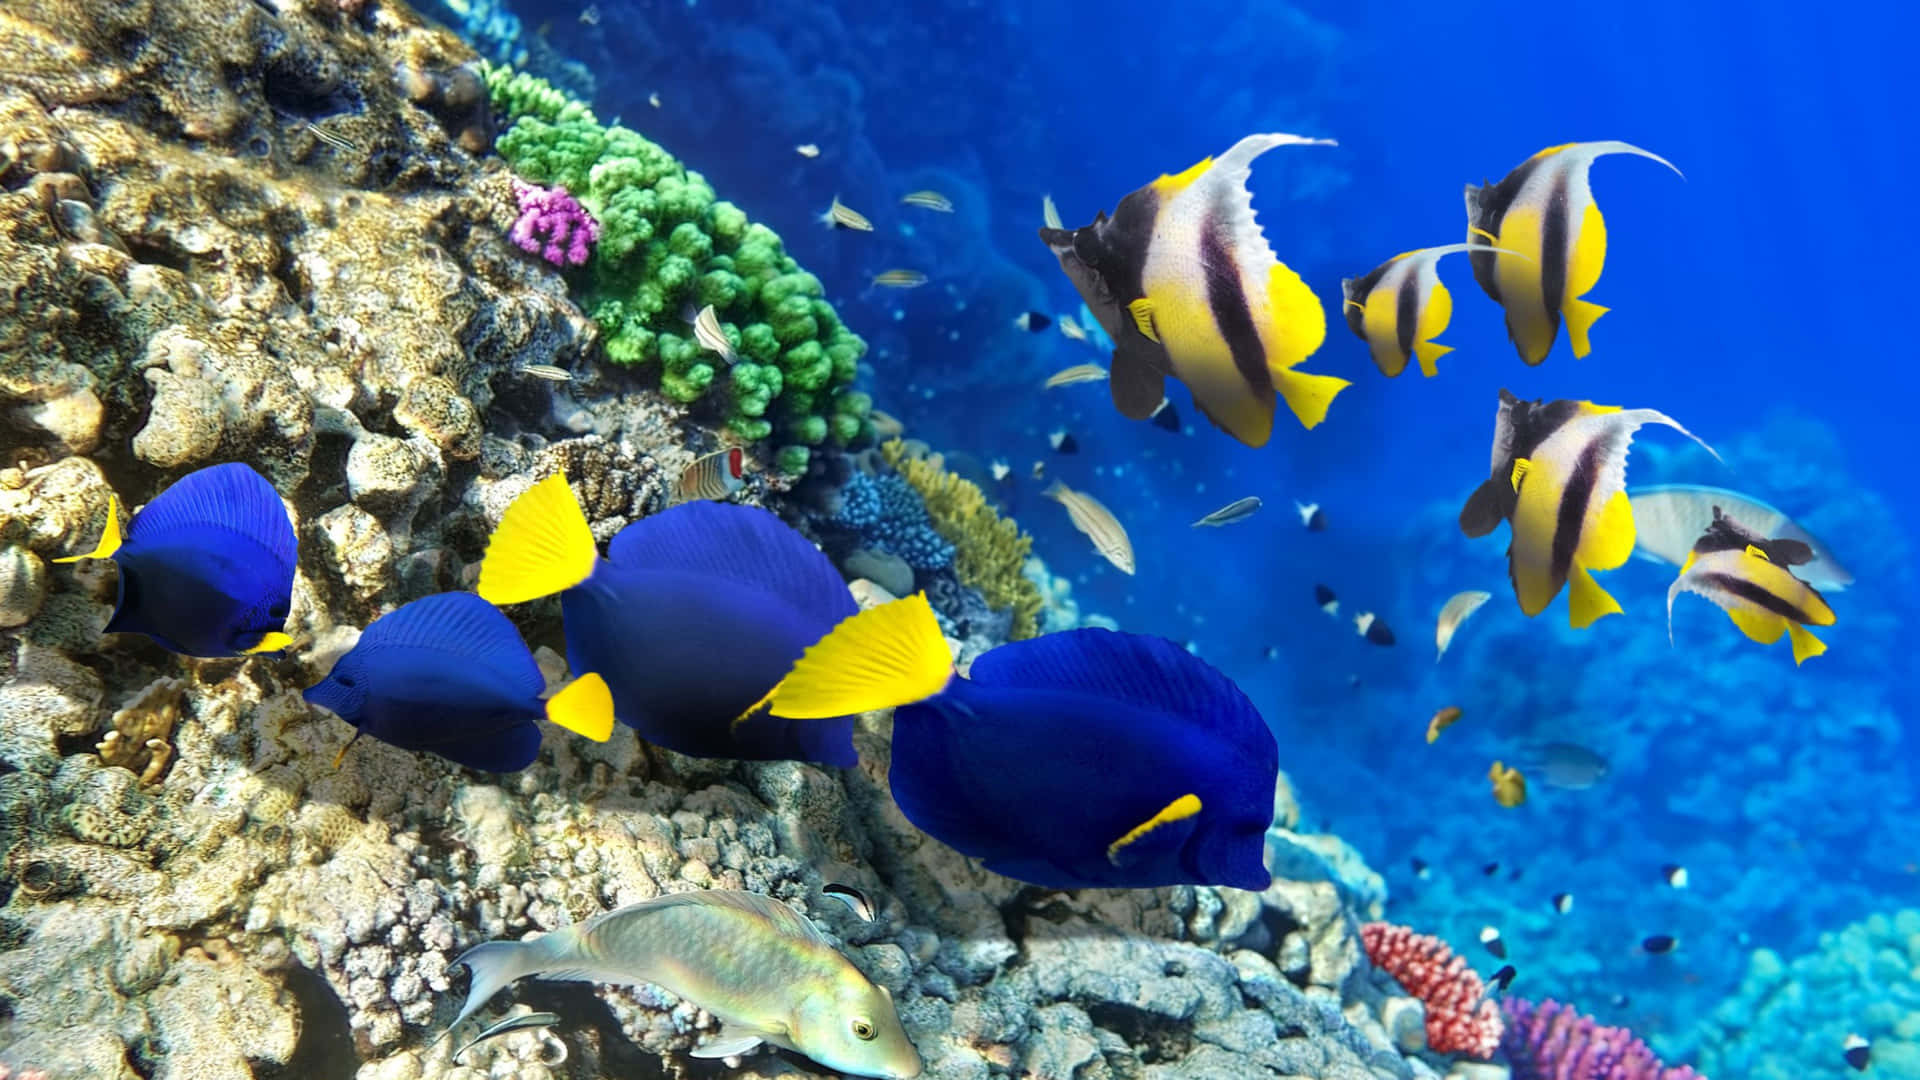 A school of colorful tropical fish in a deep blue ocean Wallpaper